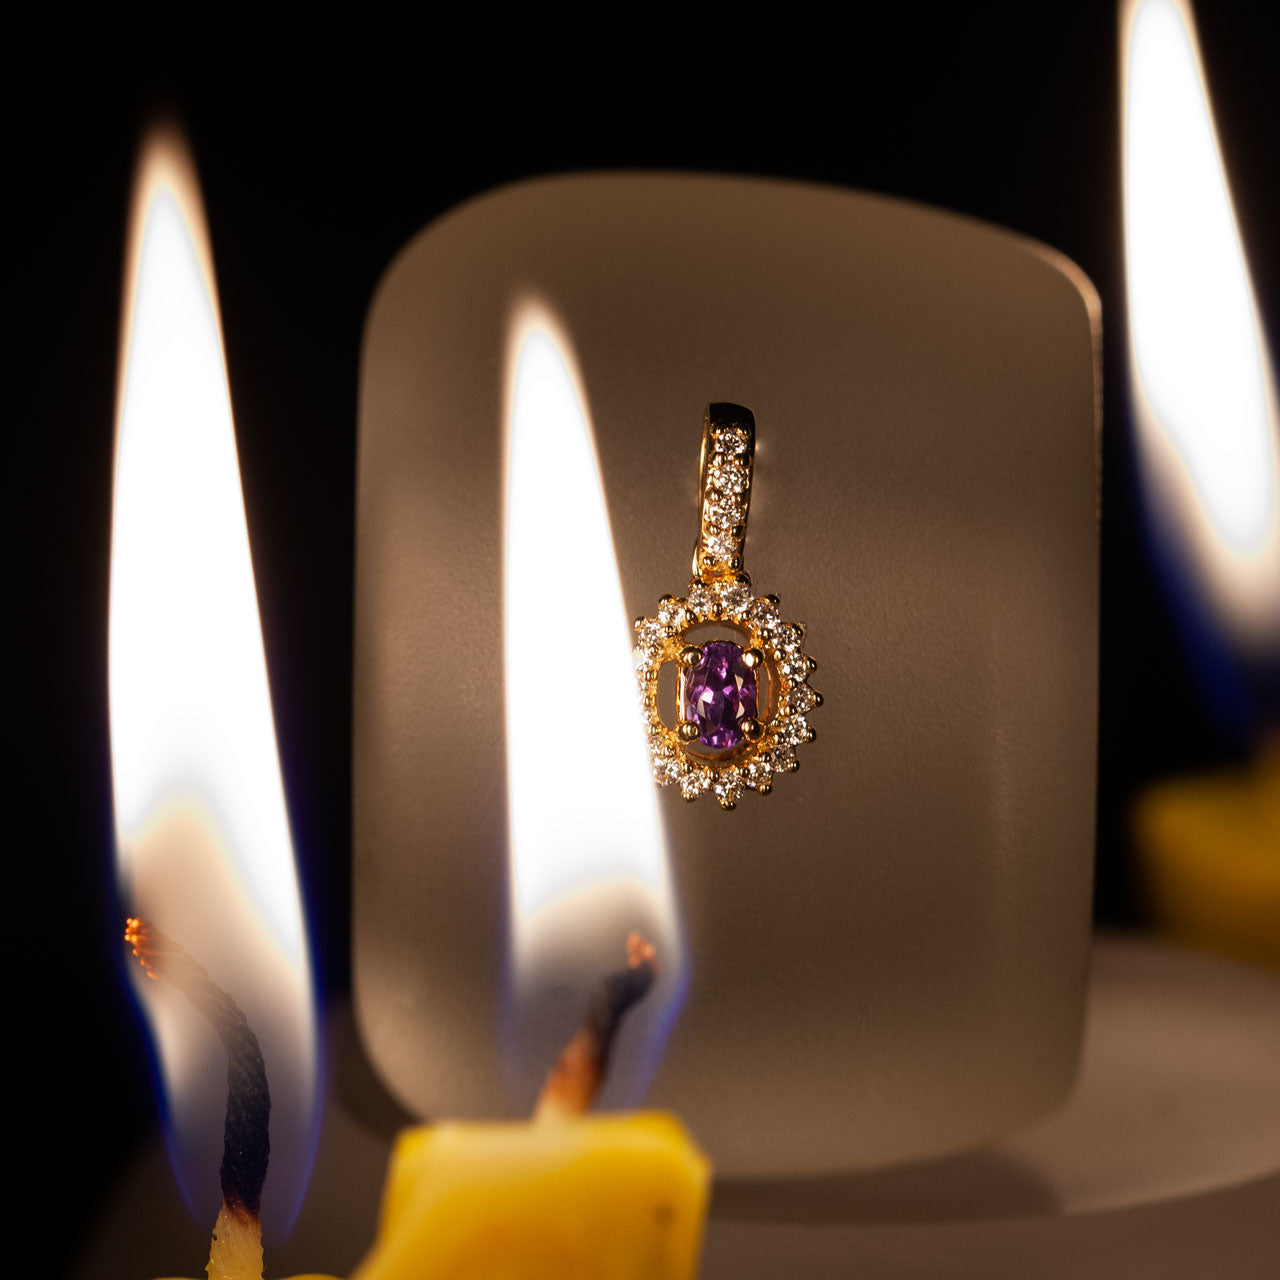 18k yellow gold pendant with a 0.23ct color-changing Alexandrite stone and candle ambiance